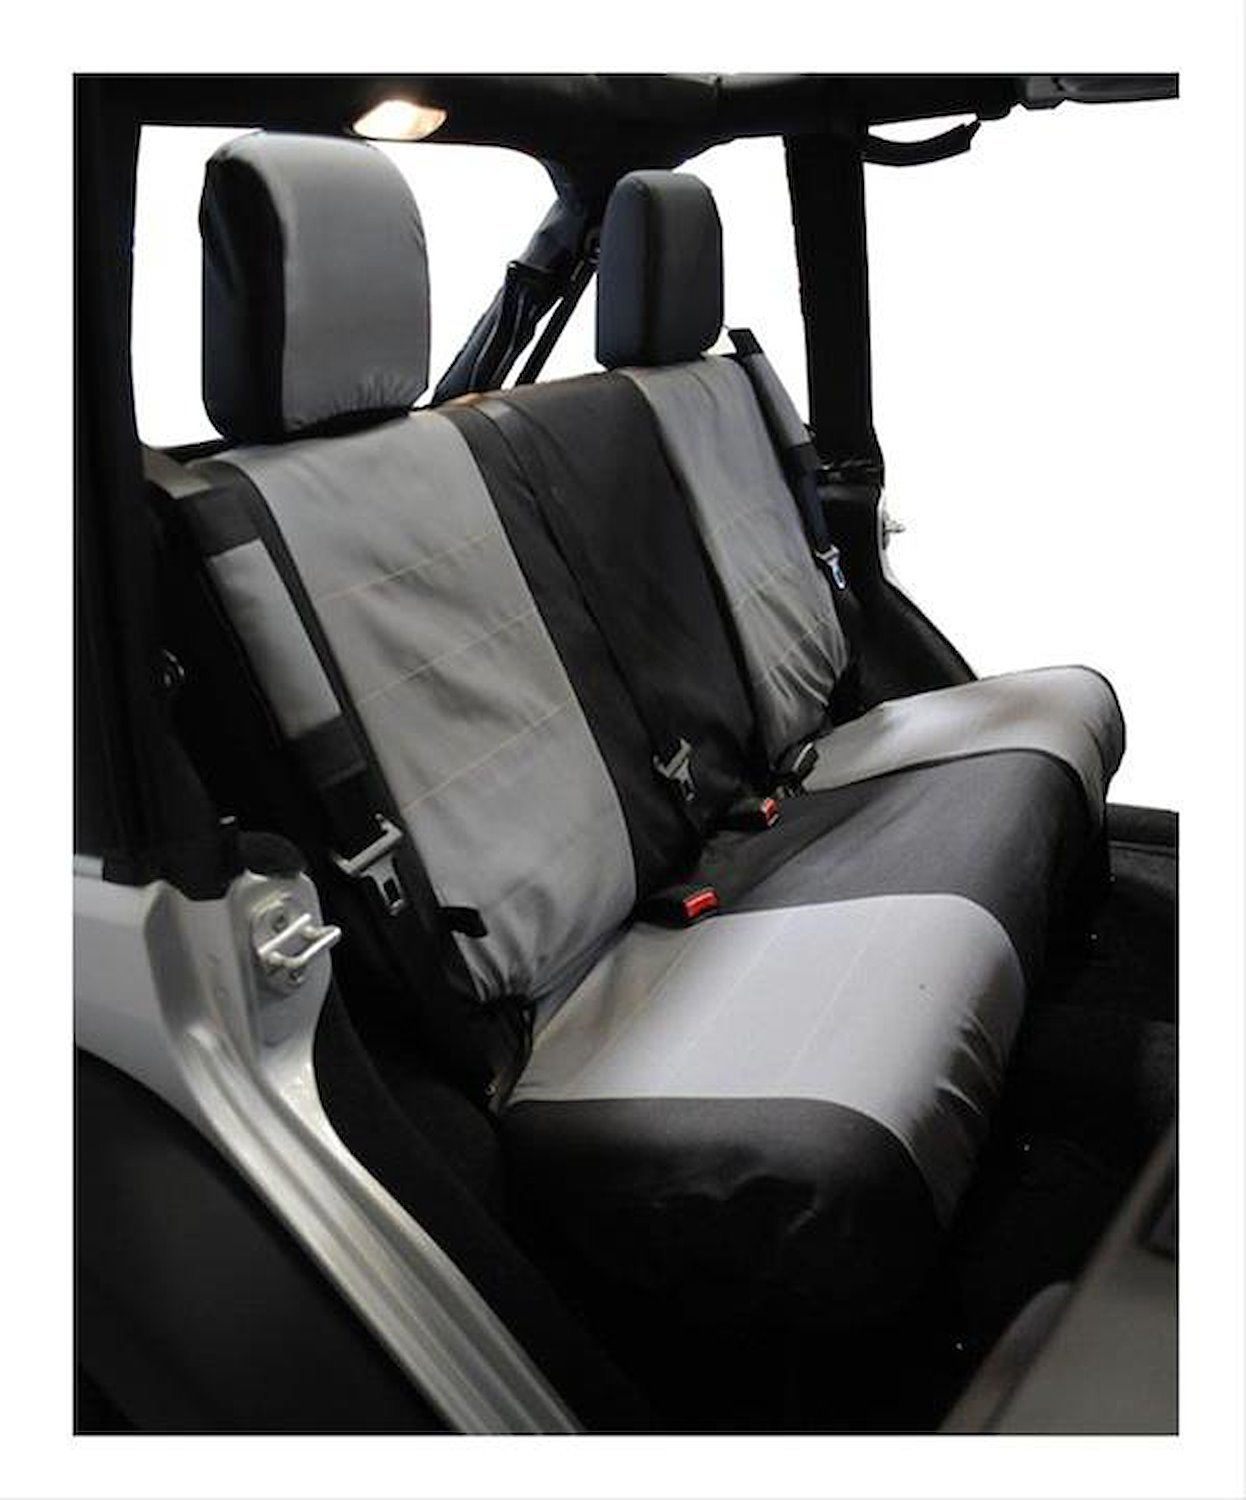 SC30121 Rear Polycanvas Seat Cover for 2007-2011 Jeep JK Wrangler w/ 2-Doors; Black and Gray